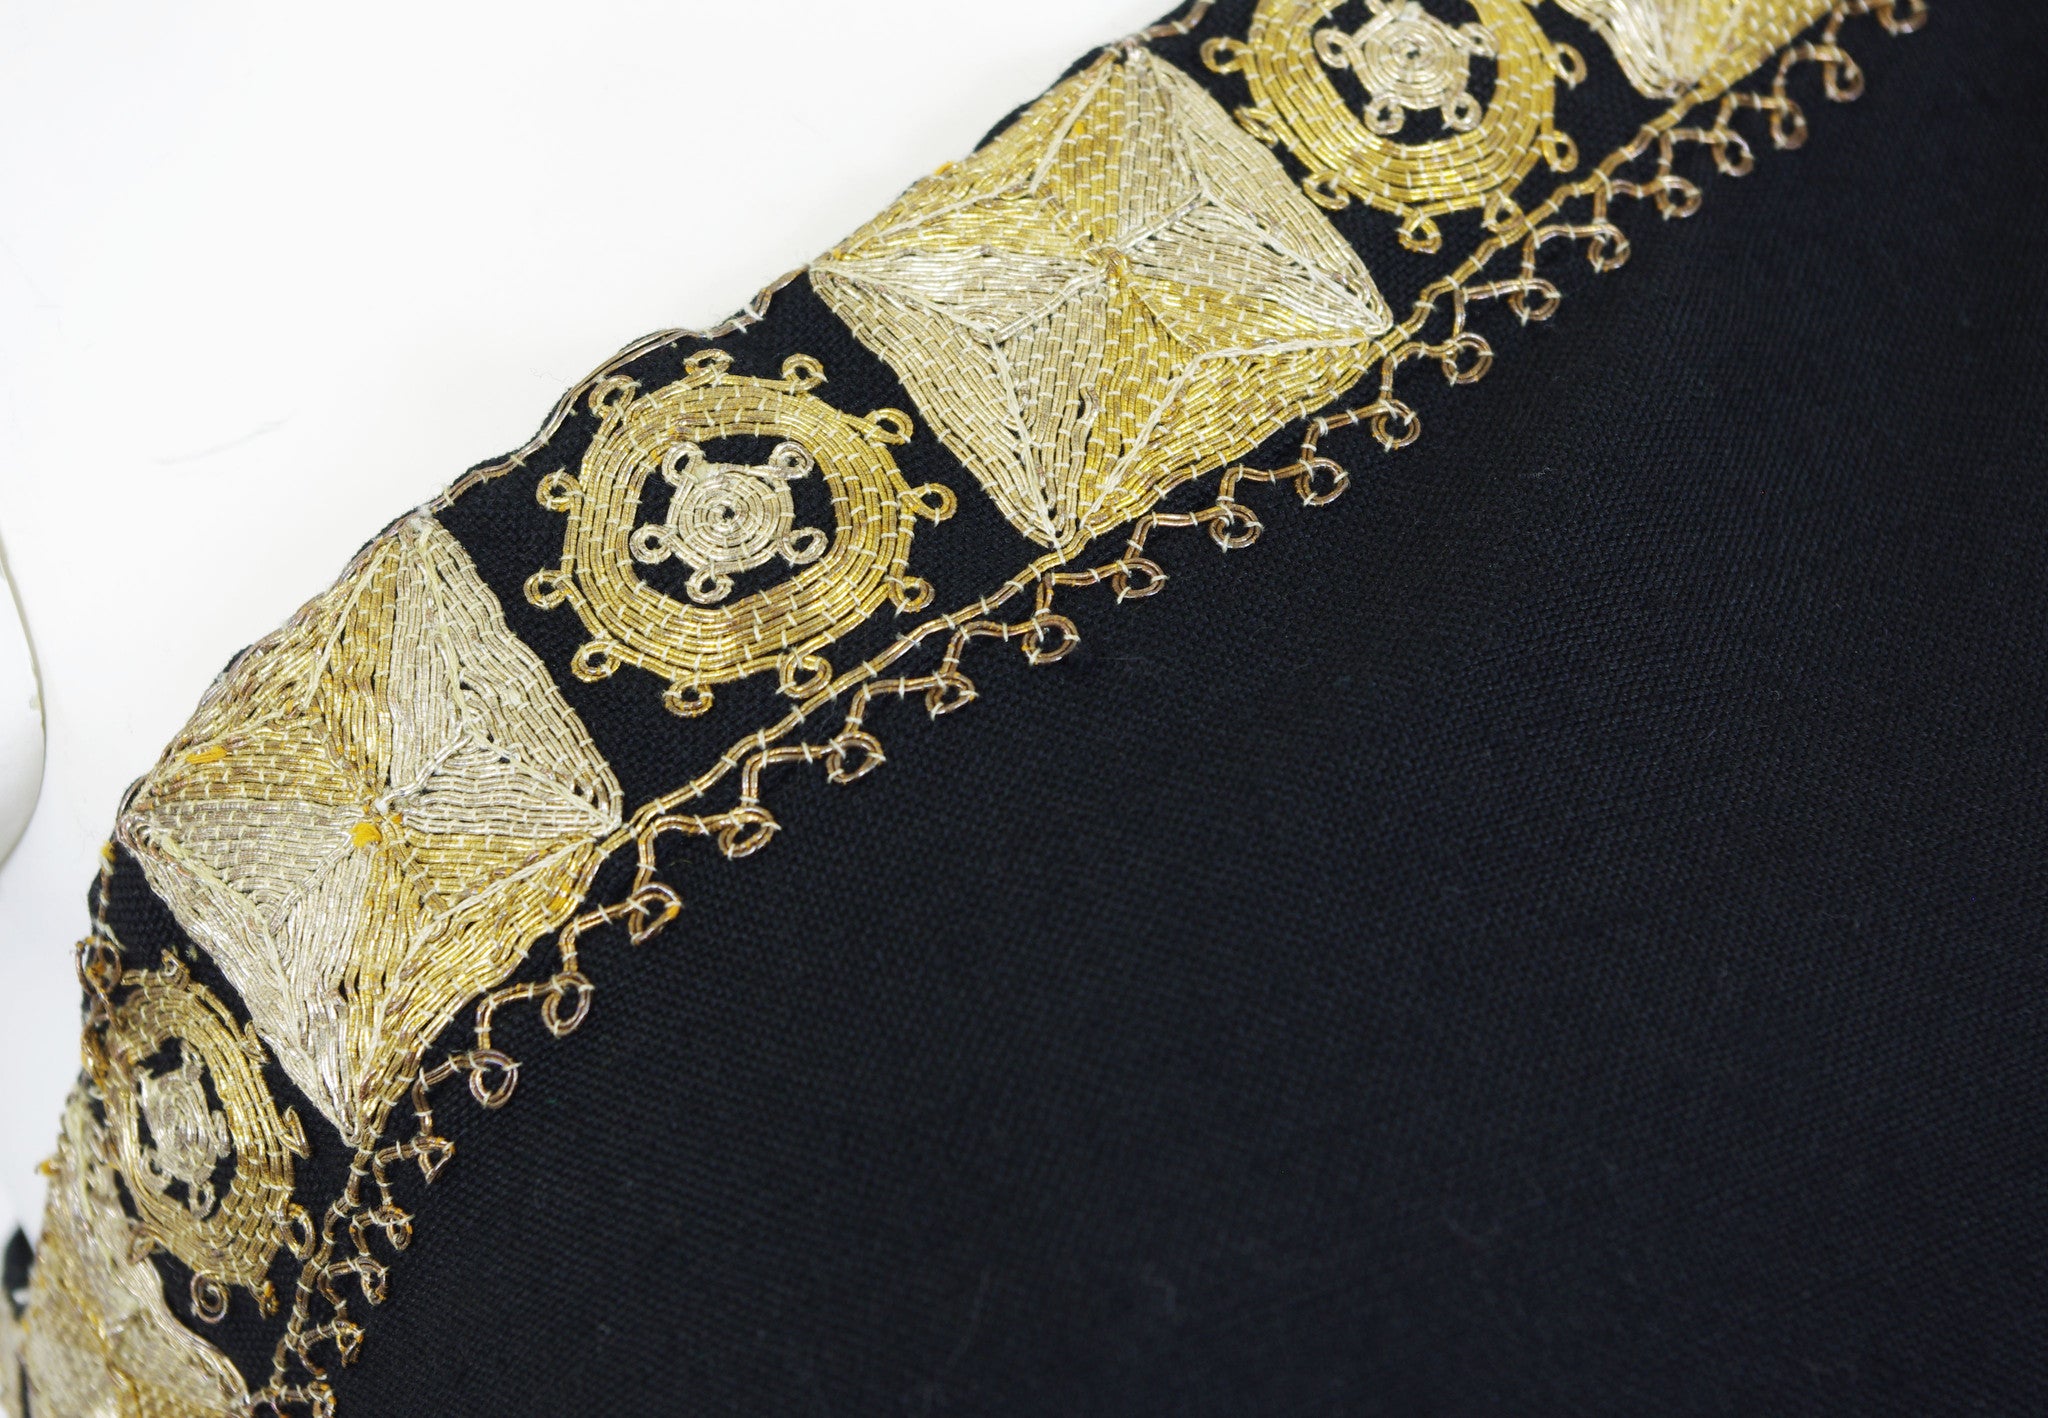 Early 1960's Gold Embroidered Black Wool One Shoulder Dress